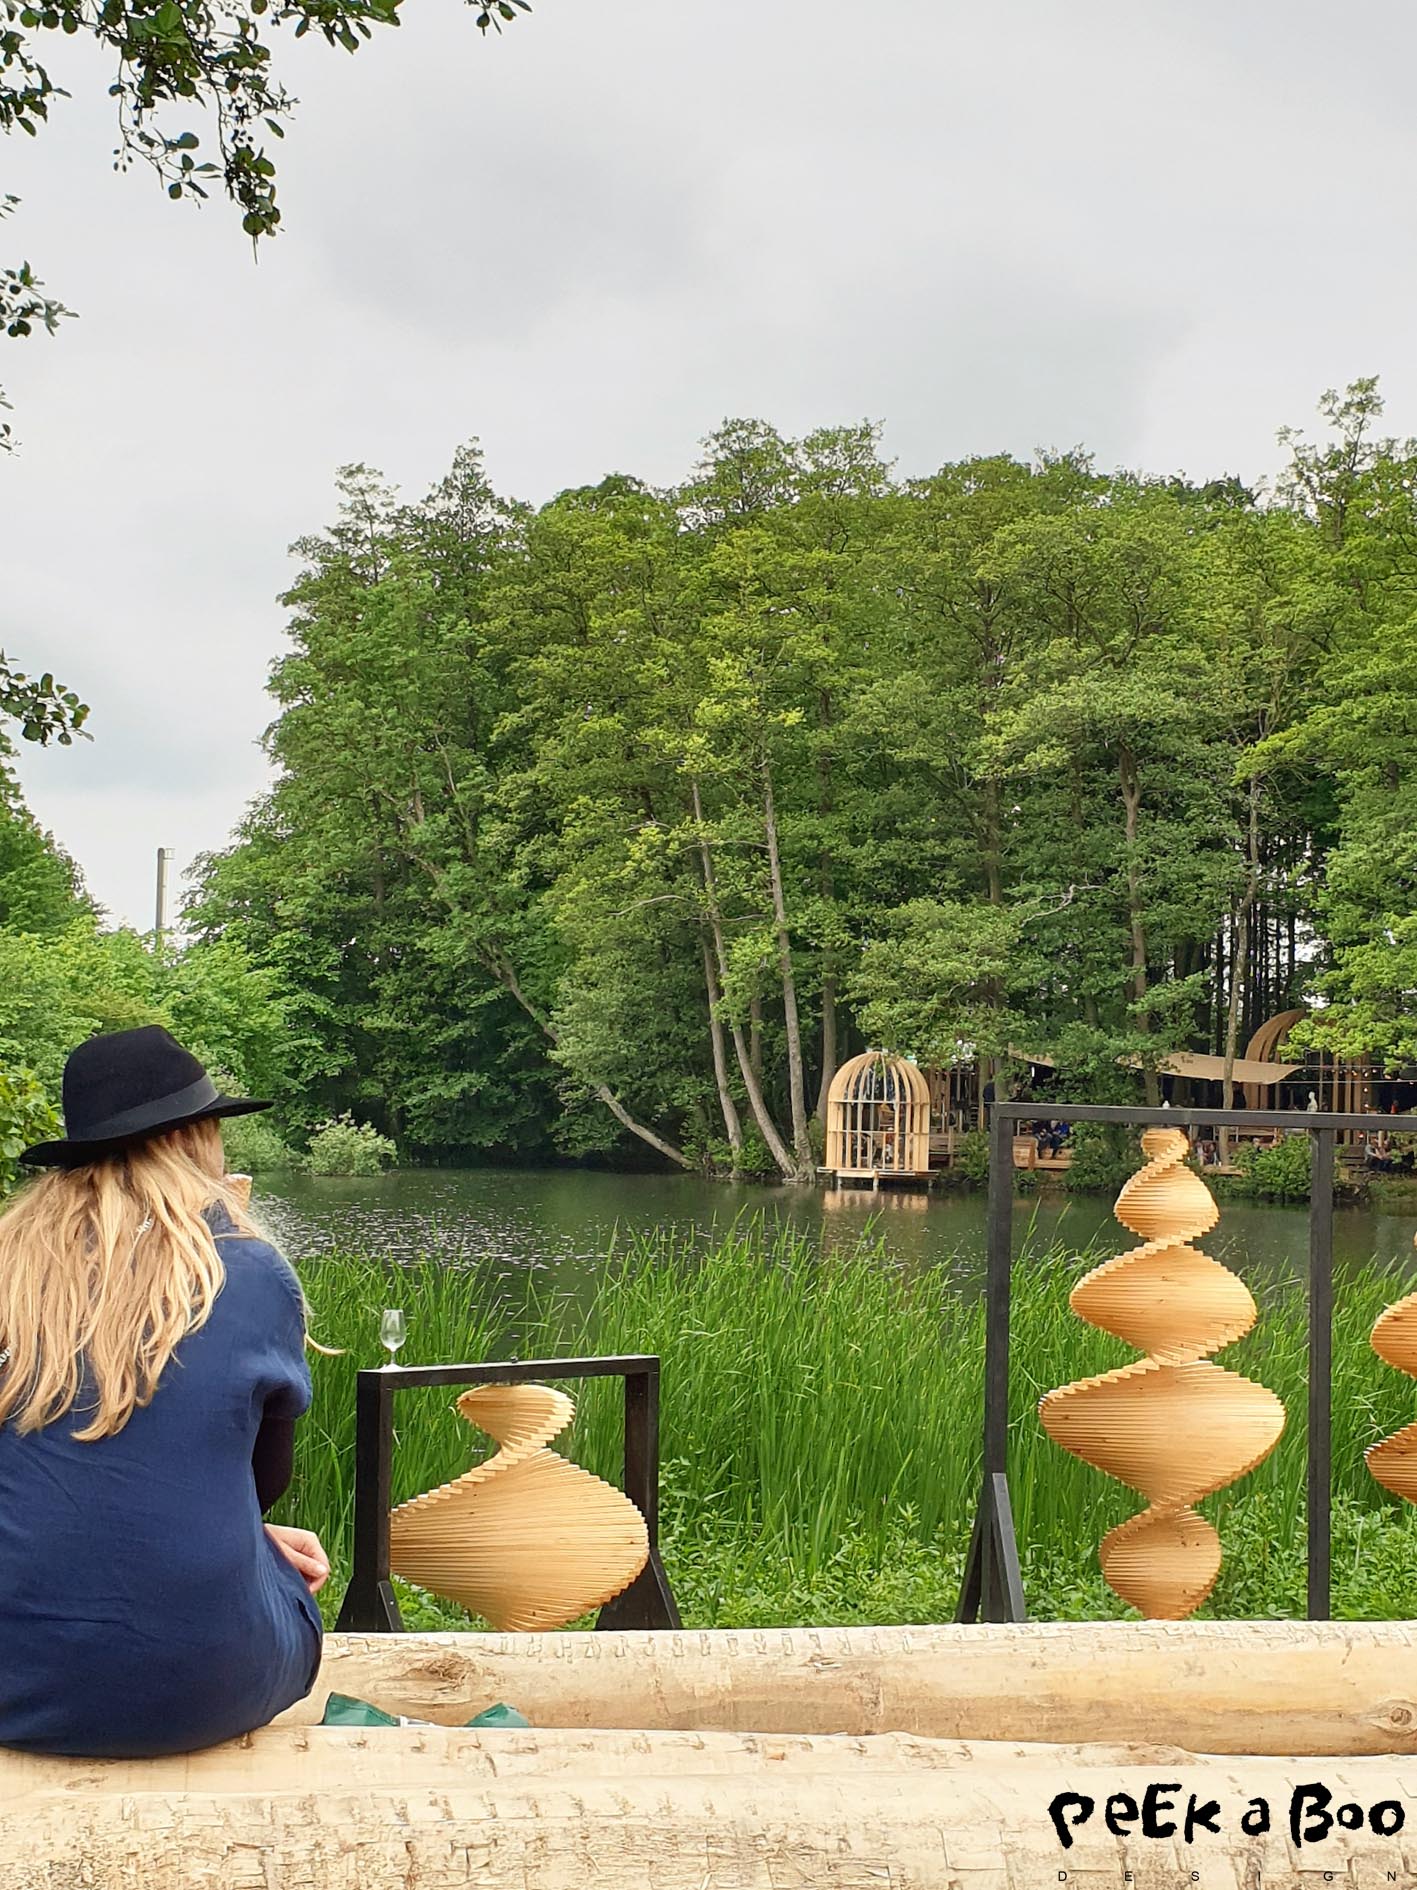 The art installations in the nature around Egeskov Castle at Heartland Festival.